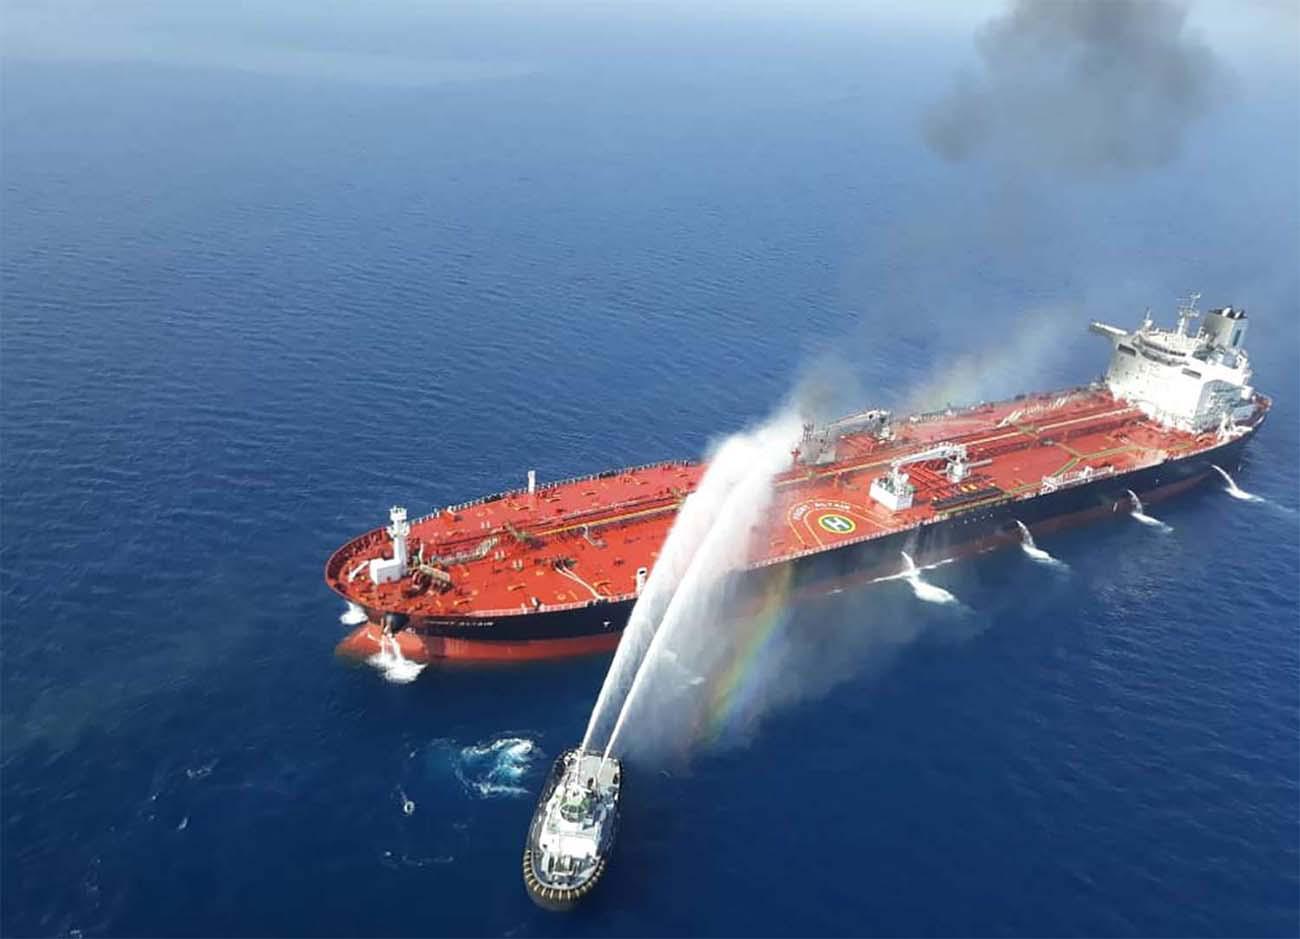 The attacks on the oil tankers raised the spectre of war